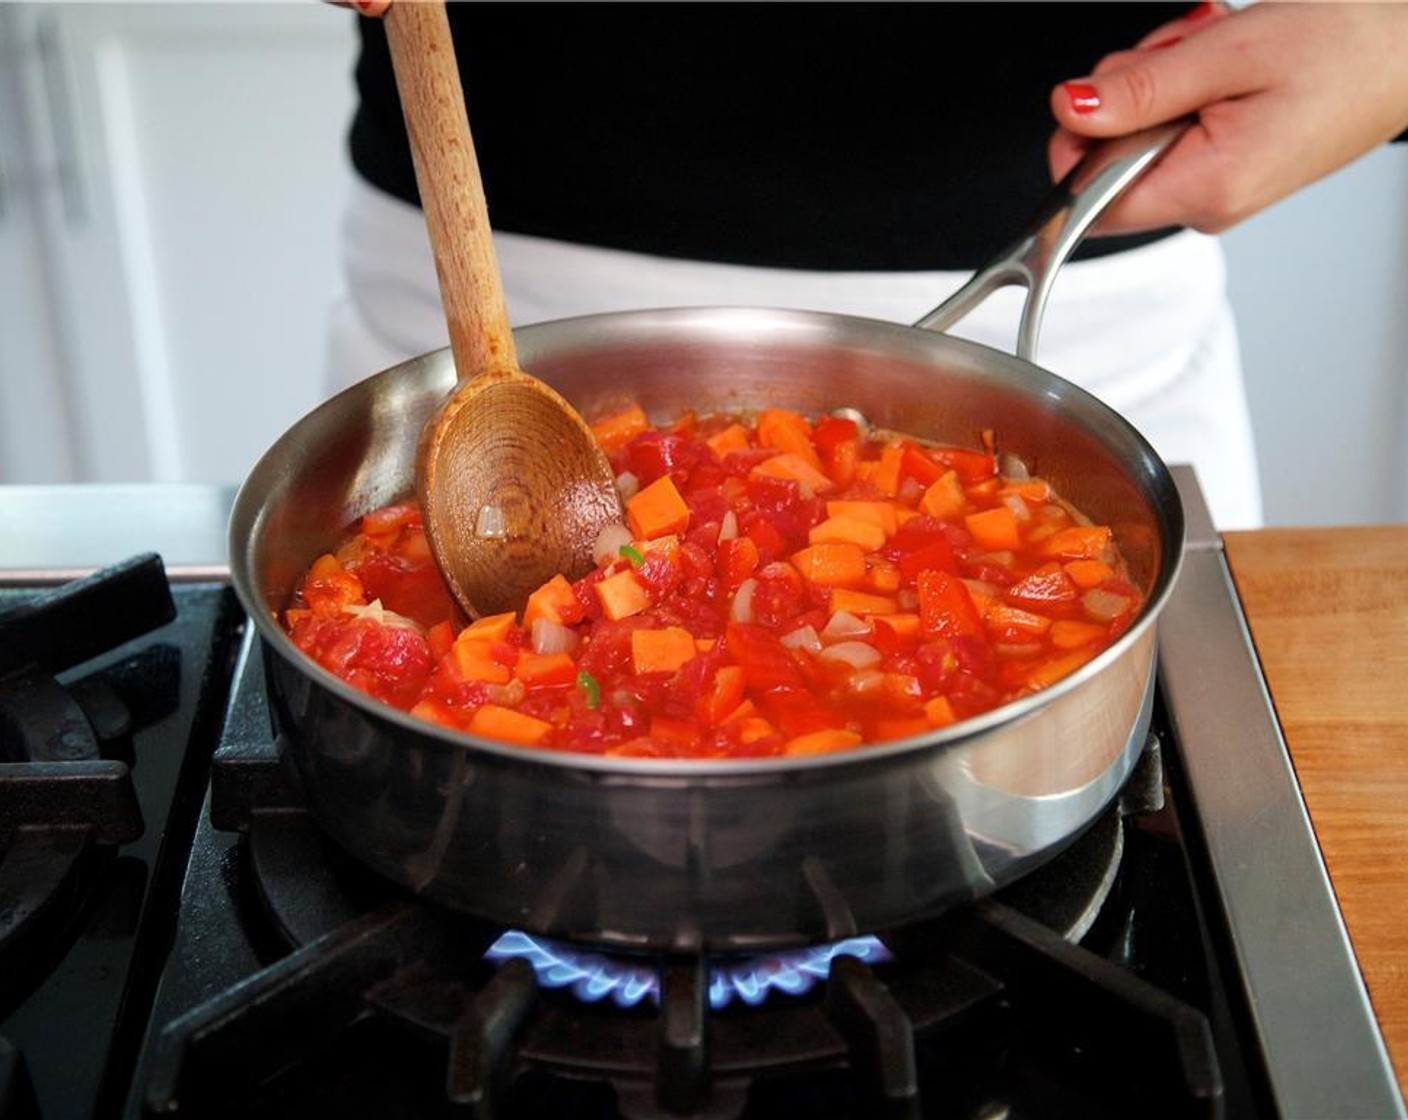 step 5 Bring to a boil and then reduce the heat to low. Add Salt (1/4 tsp), stir, cover, and simmer for 15 minutes.